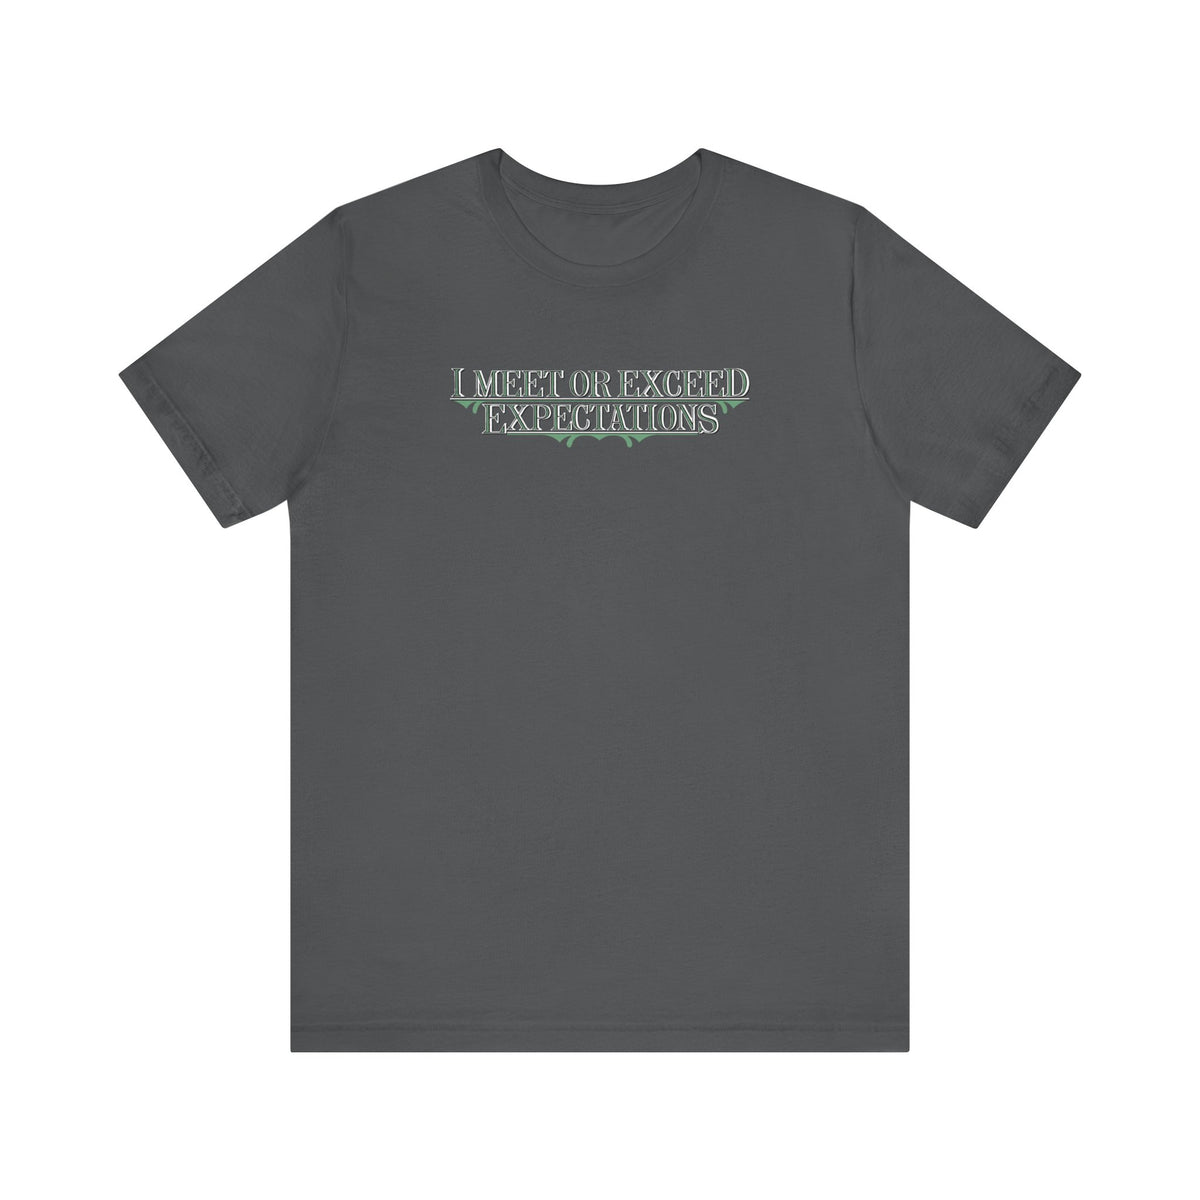 I Meet Or Exceed Expectations  - Men's T-Shirt